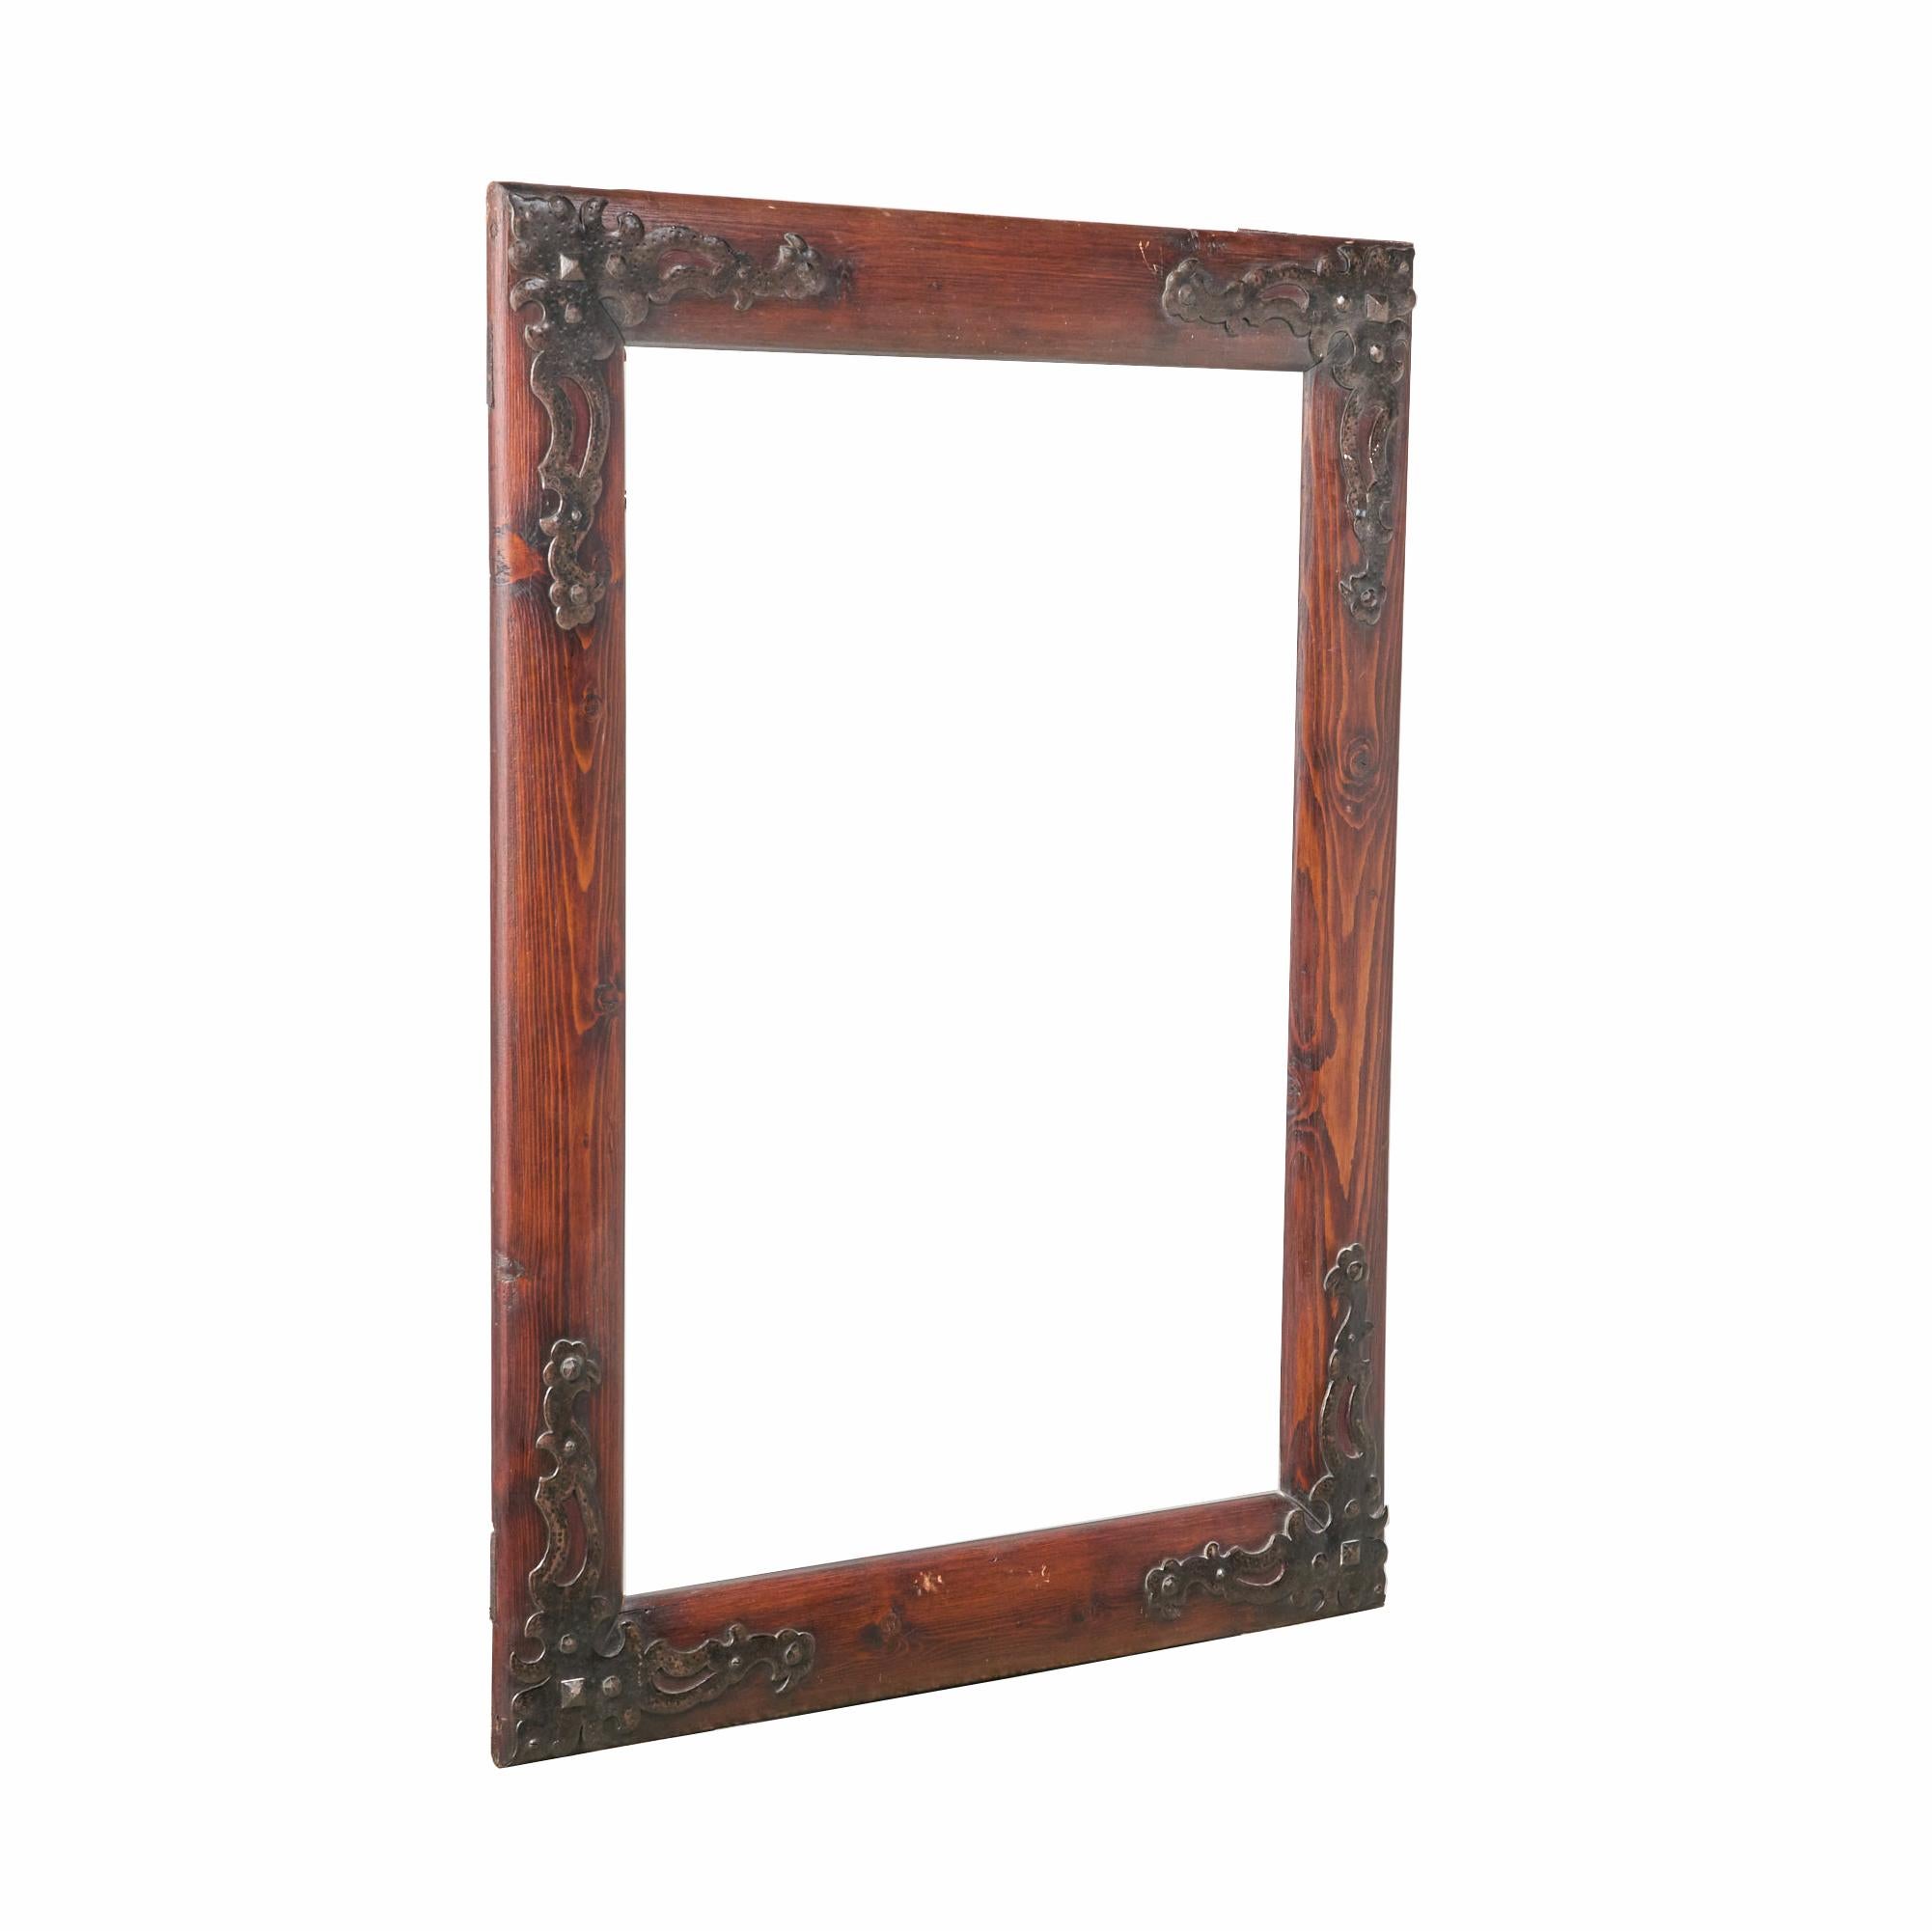 Iron and pine frame from the Estate of Jose Thenee. Great condition and quality. 